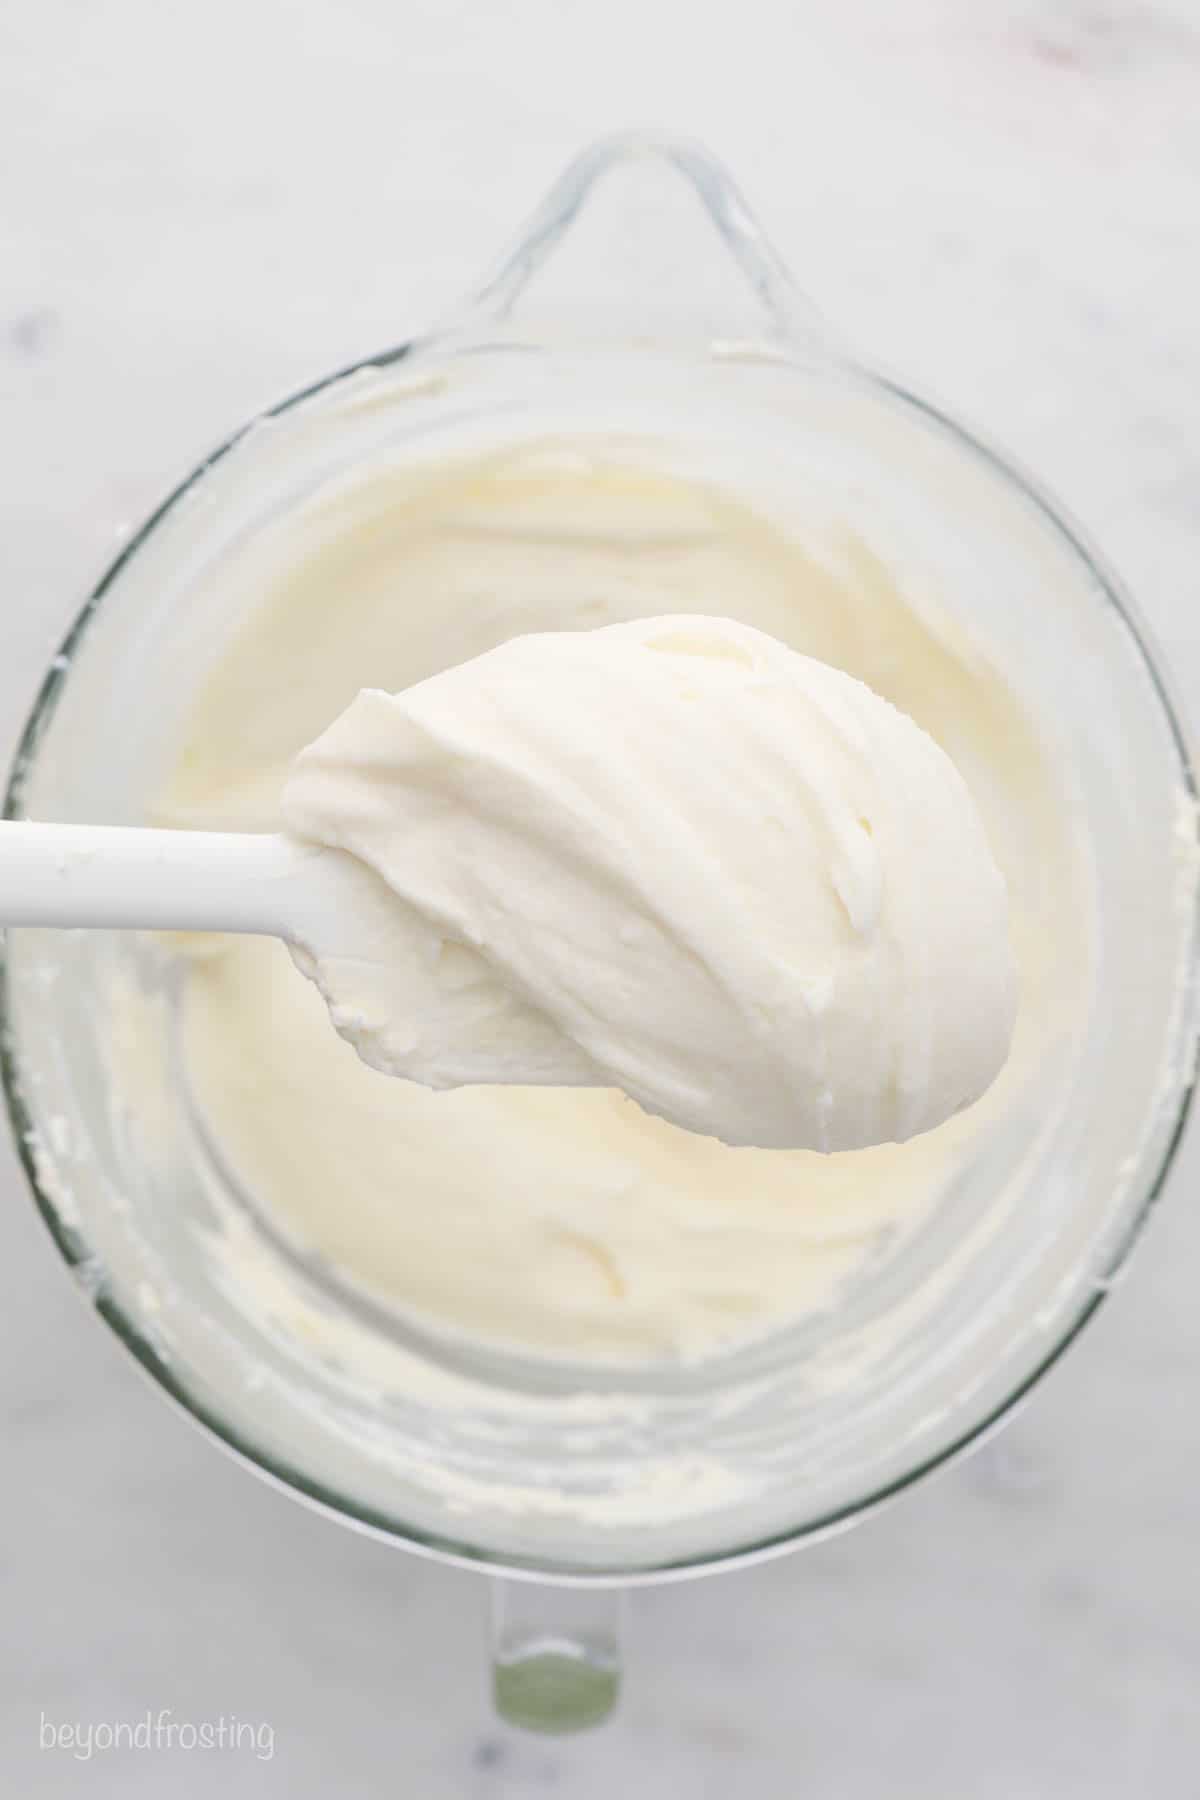 Cream cheese frosting on a spatula over a mixing bowl of it